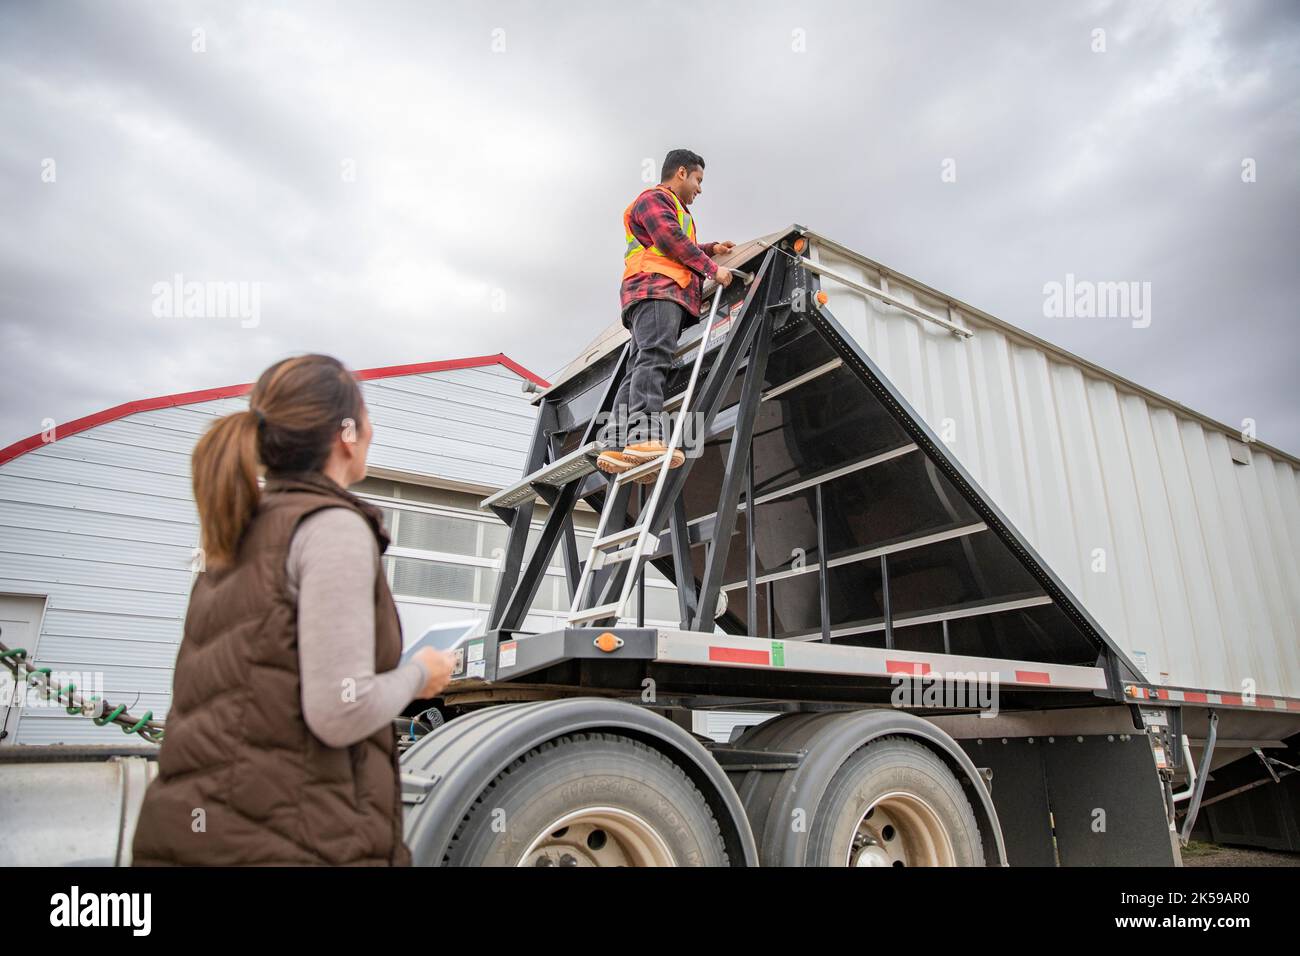 Farmer with digital tablet talking with farmworker on trailer ladder Stock Photo